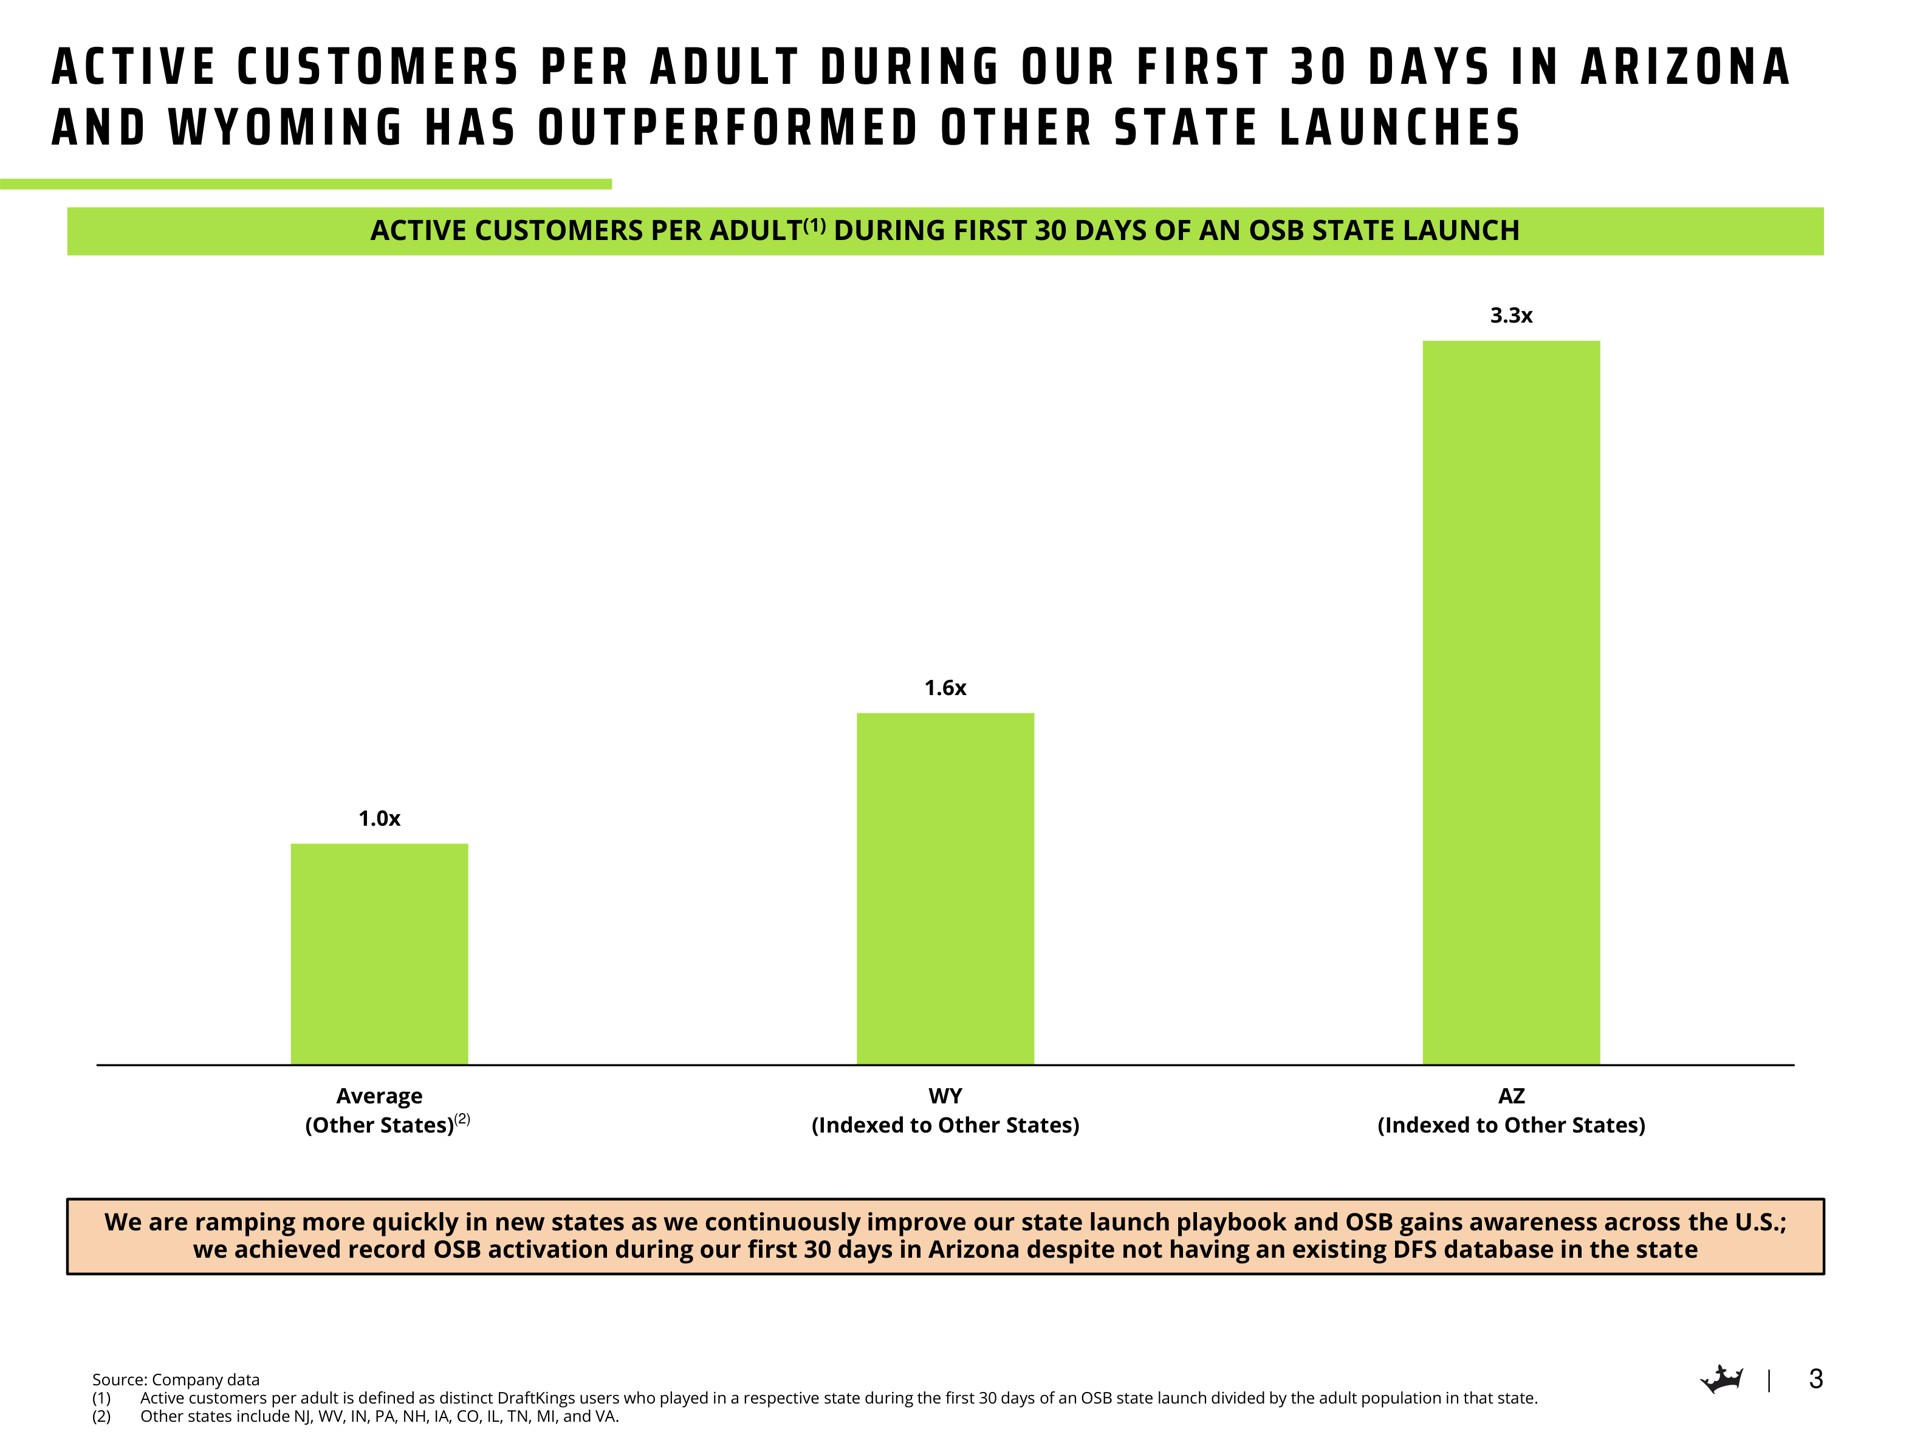 a i a i i a i a i a a i a a a active customers per adult during our first days in and has outperformed other state launches | DraftKings